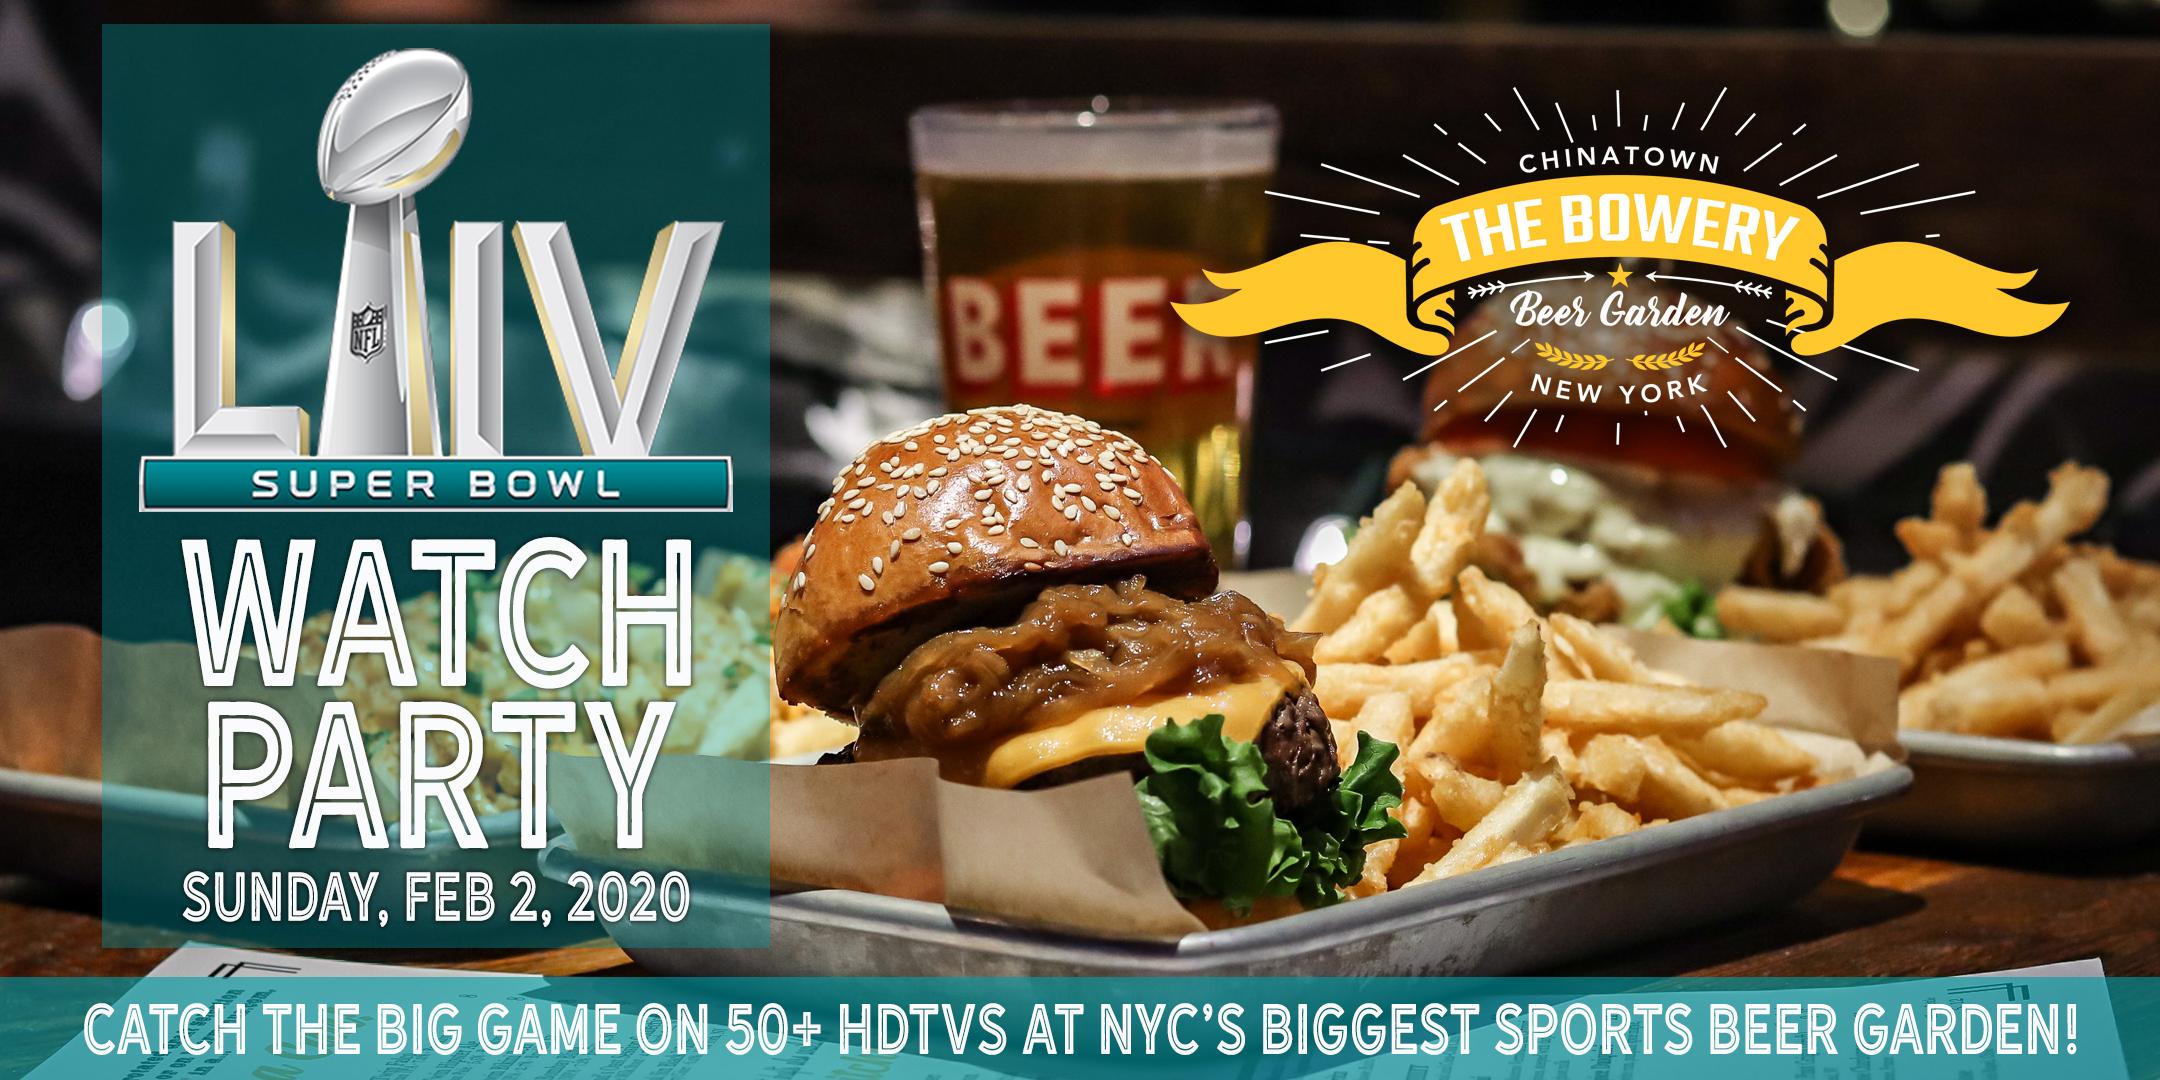 Super Bowl LIV Watch Party at The Bowery Beer Garden